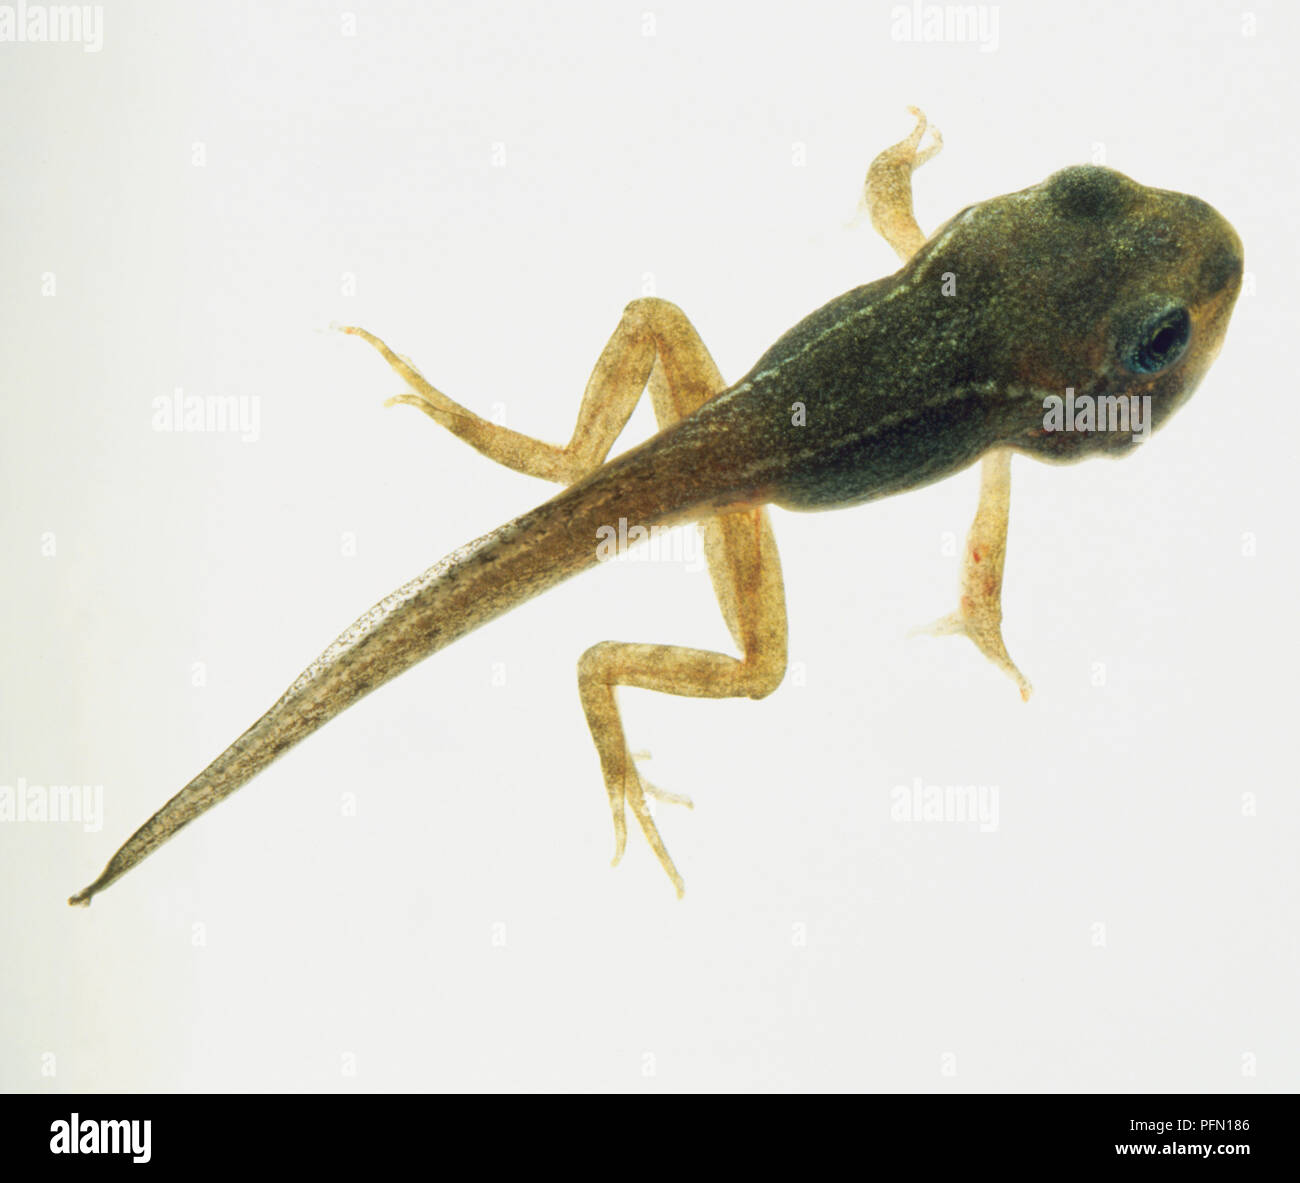 green tadpole with both front and back legs Stock Photo - Alamy